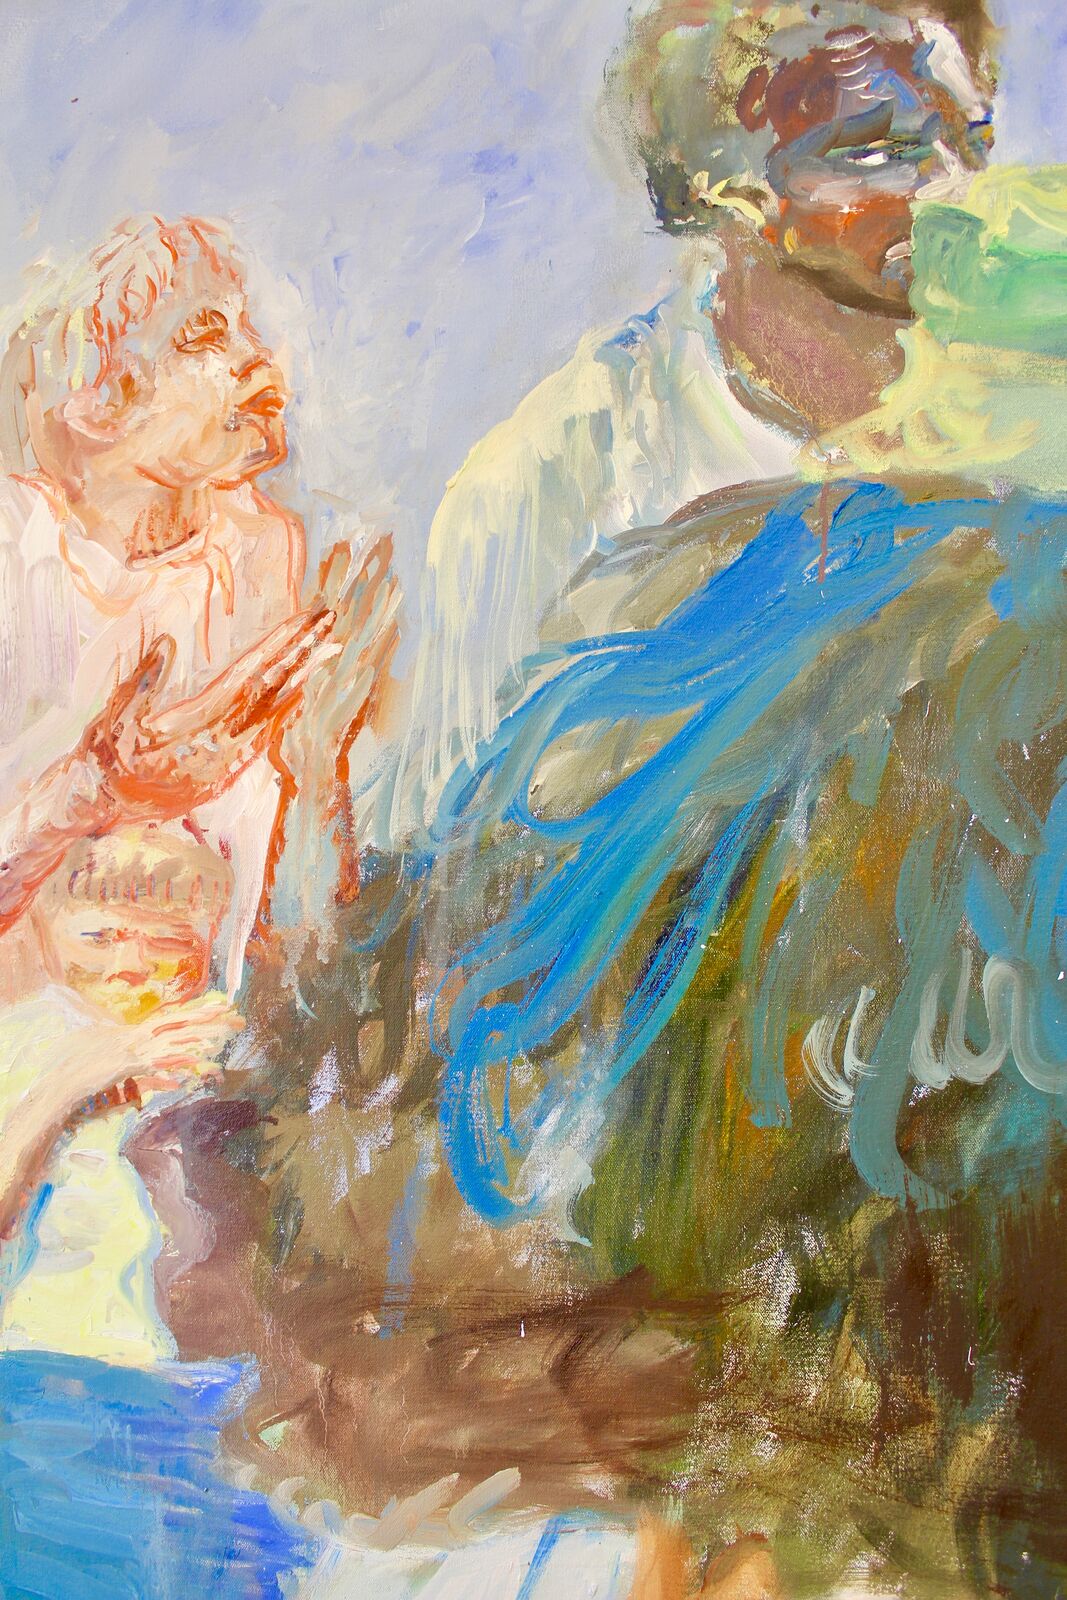 detail of jane irish's installation antipodes featuring a portrait of a child and a man in an impressionistic style